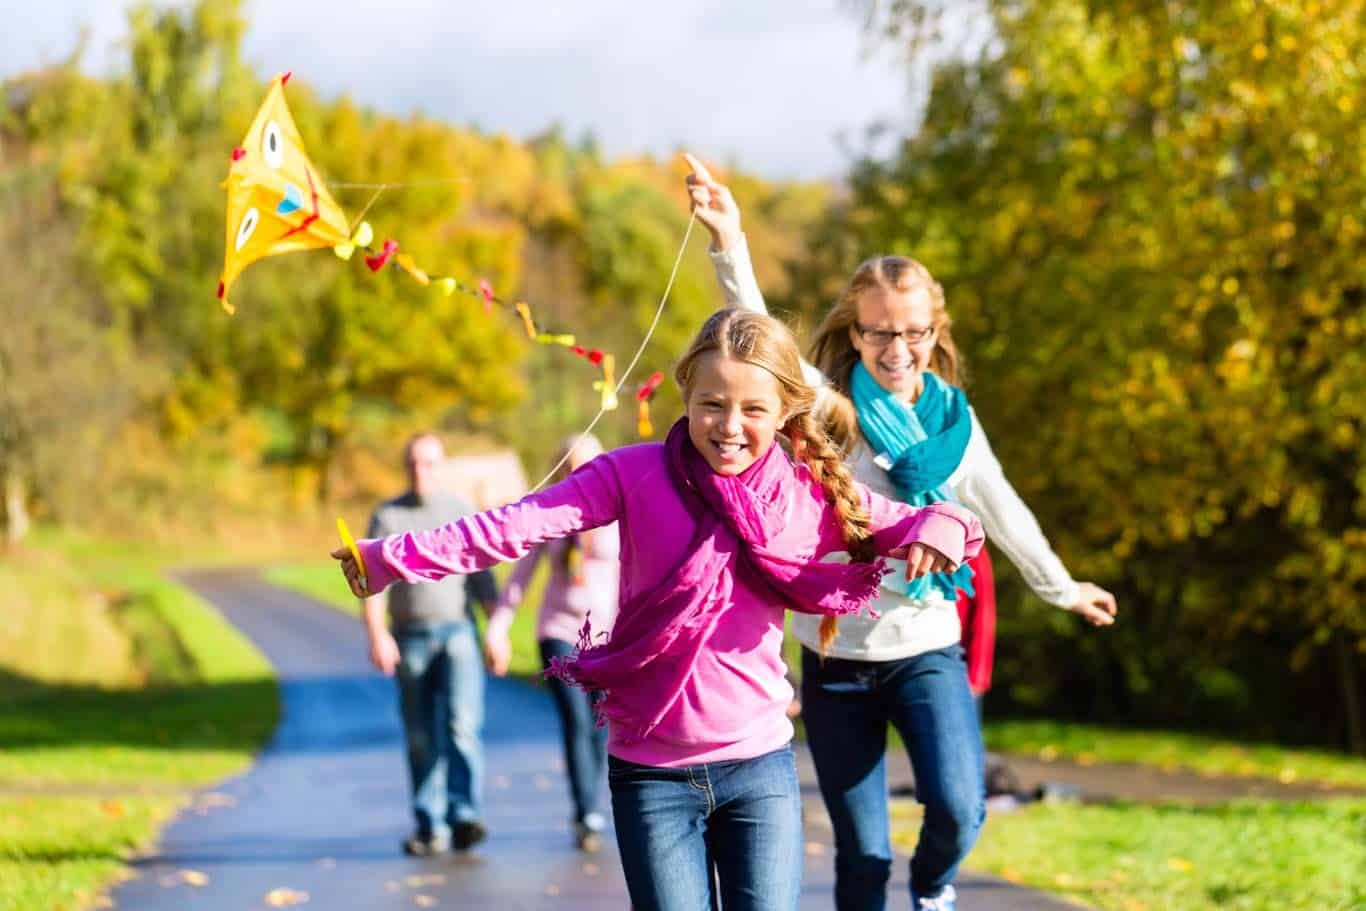 Kids flying kites with trees in background changing colors